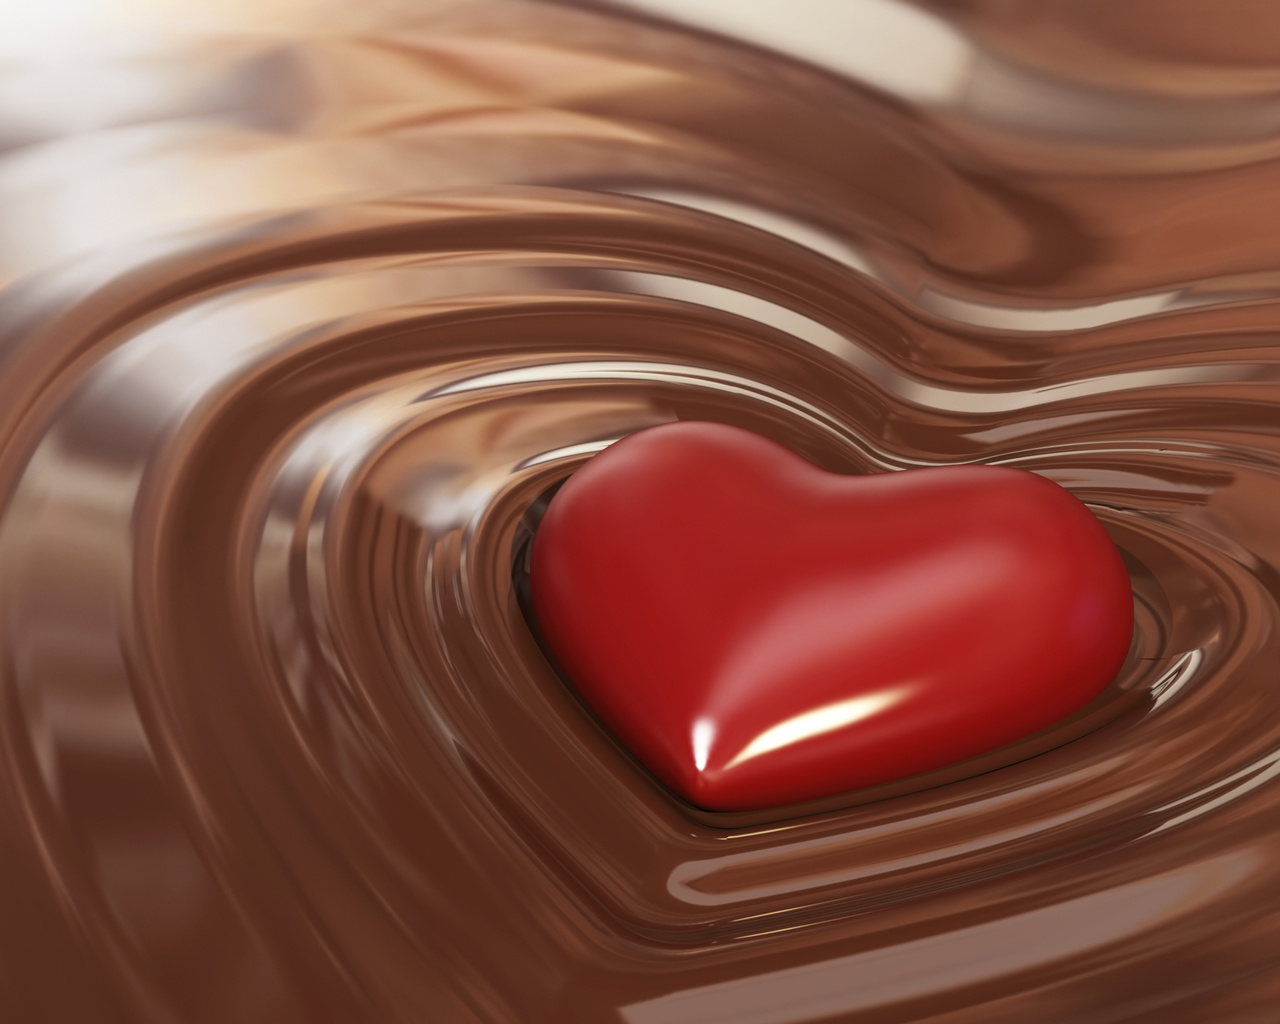  chocolate, texture, photo, background, download, chocolate, texture